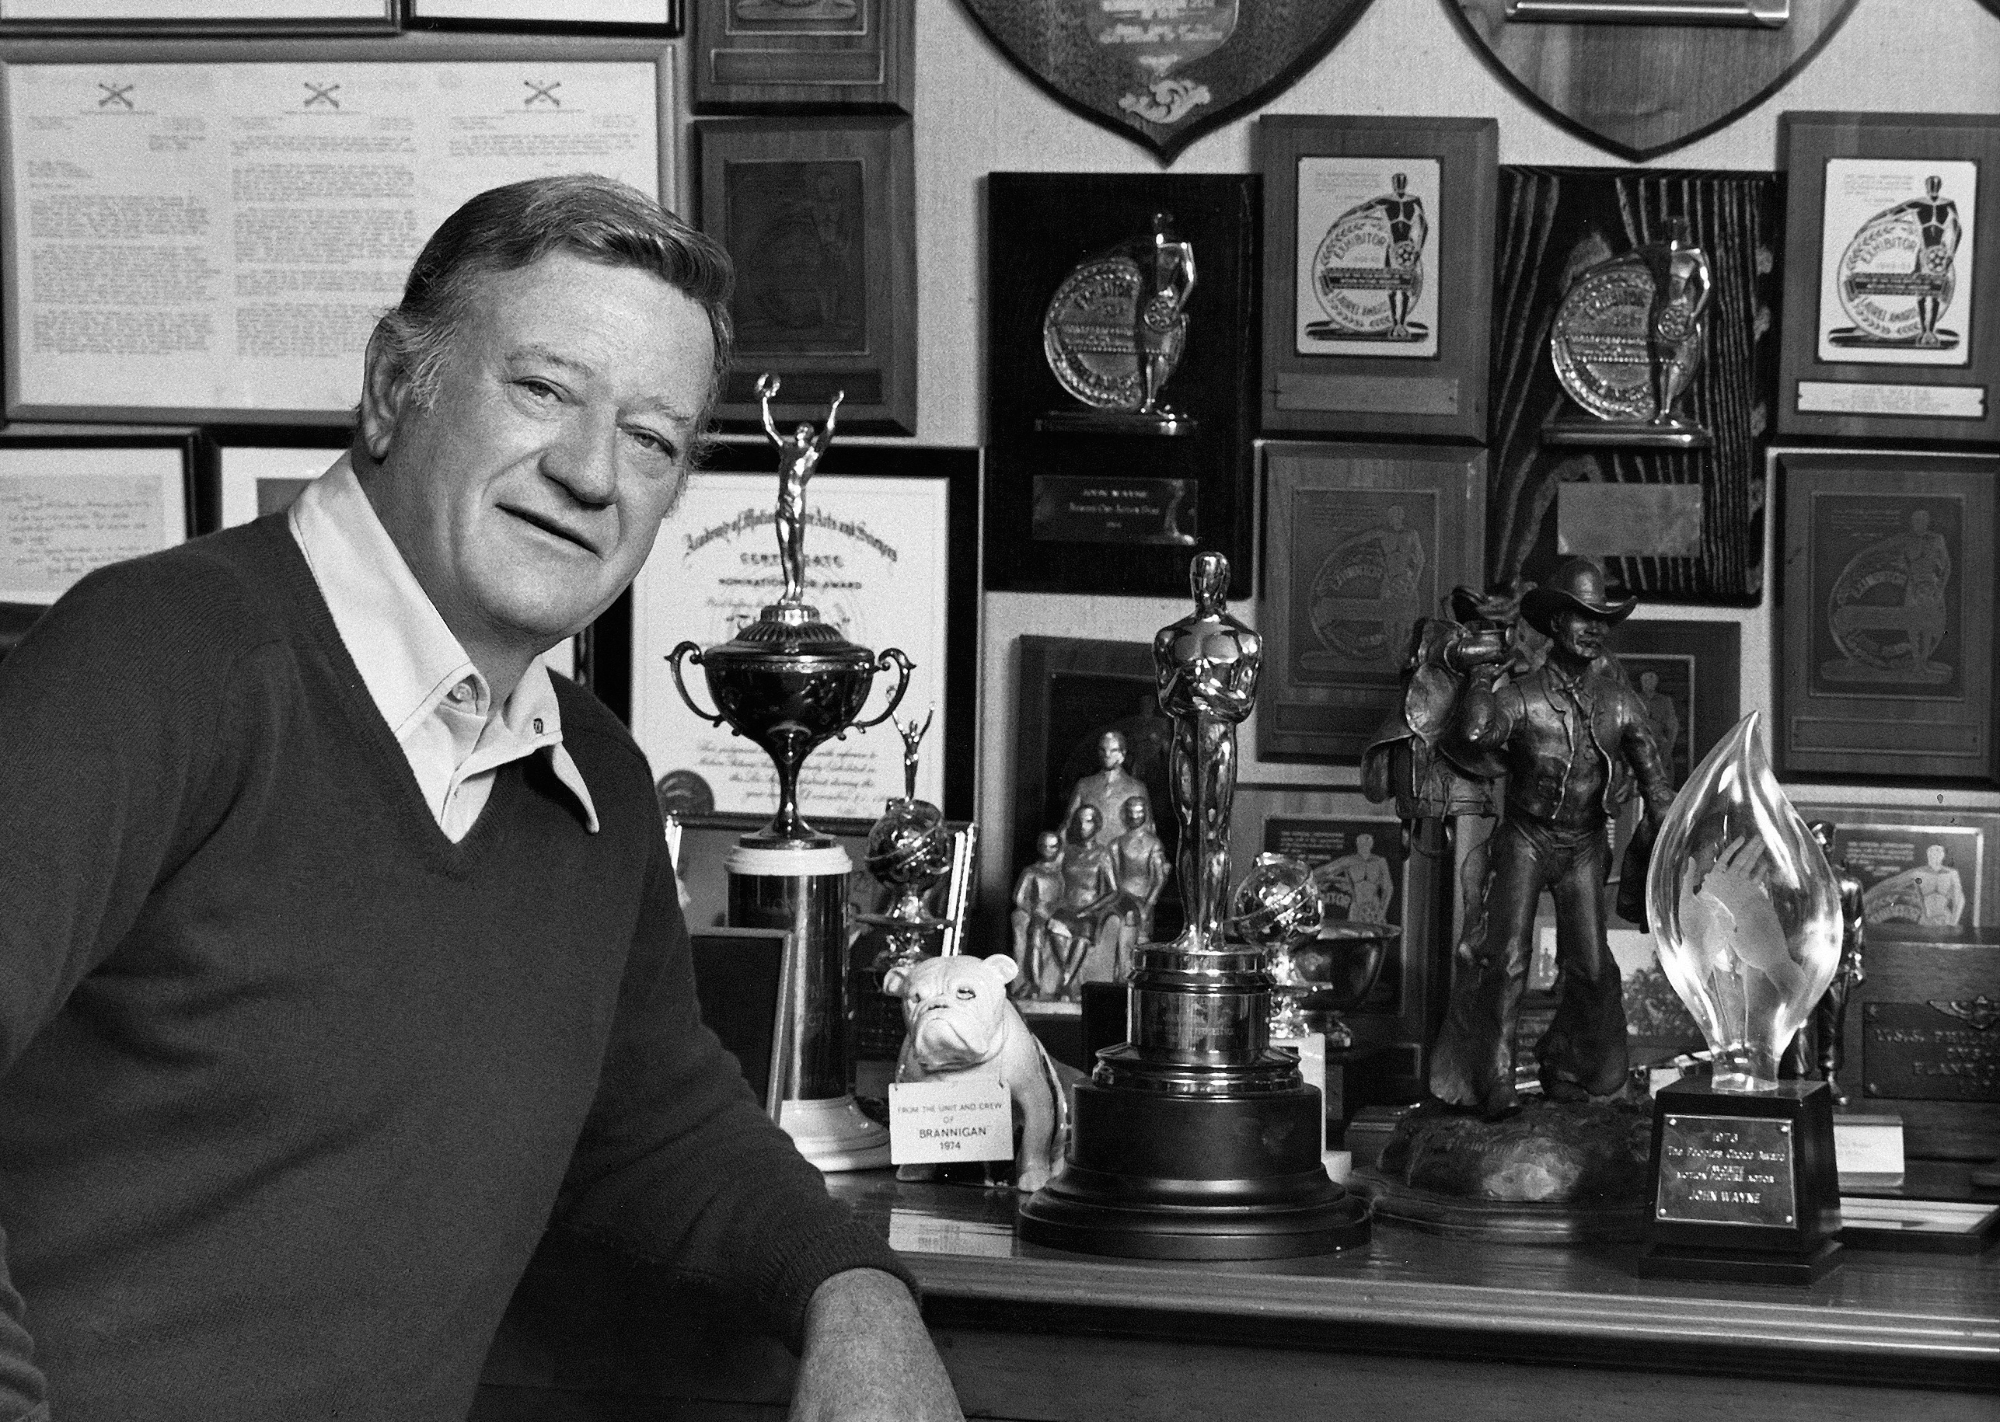 John Wayne, who starred in Western and war movies, smiling in front of a wall of trophies and plaques